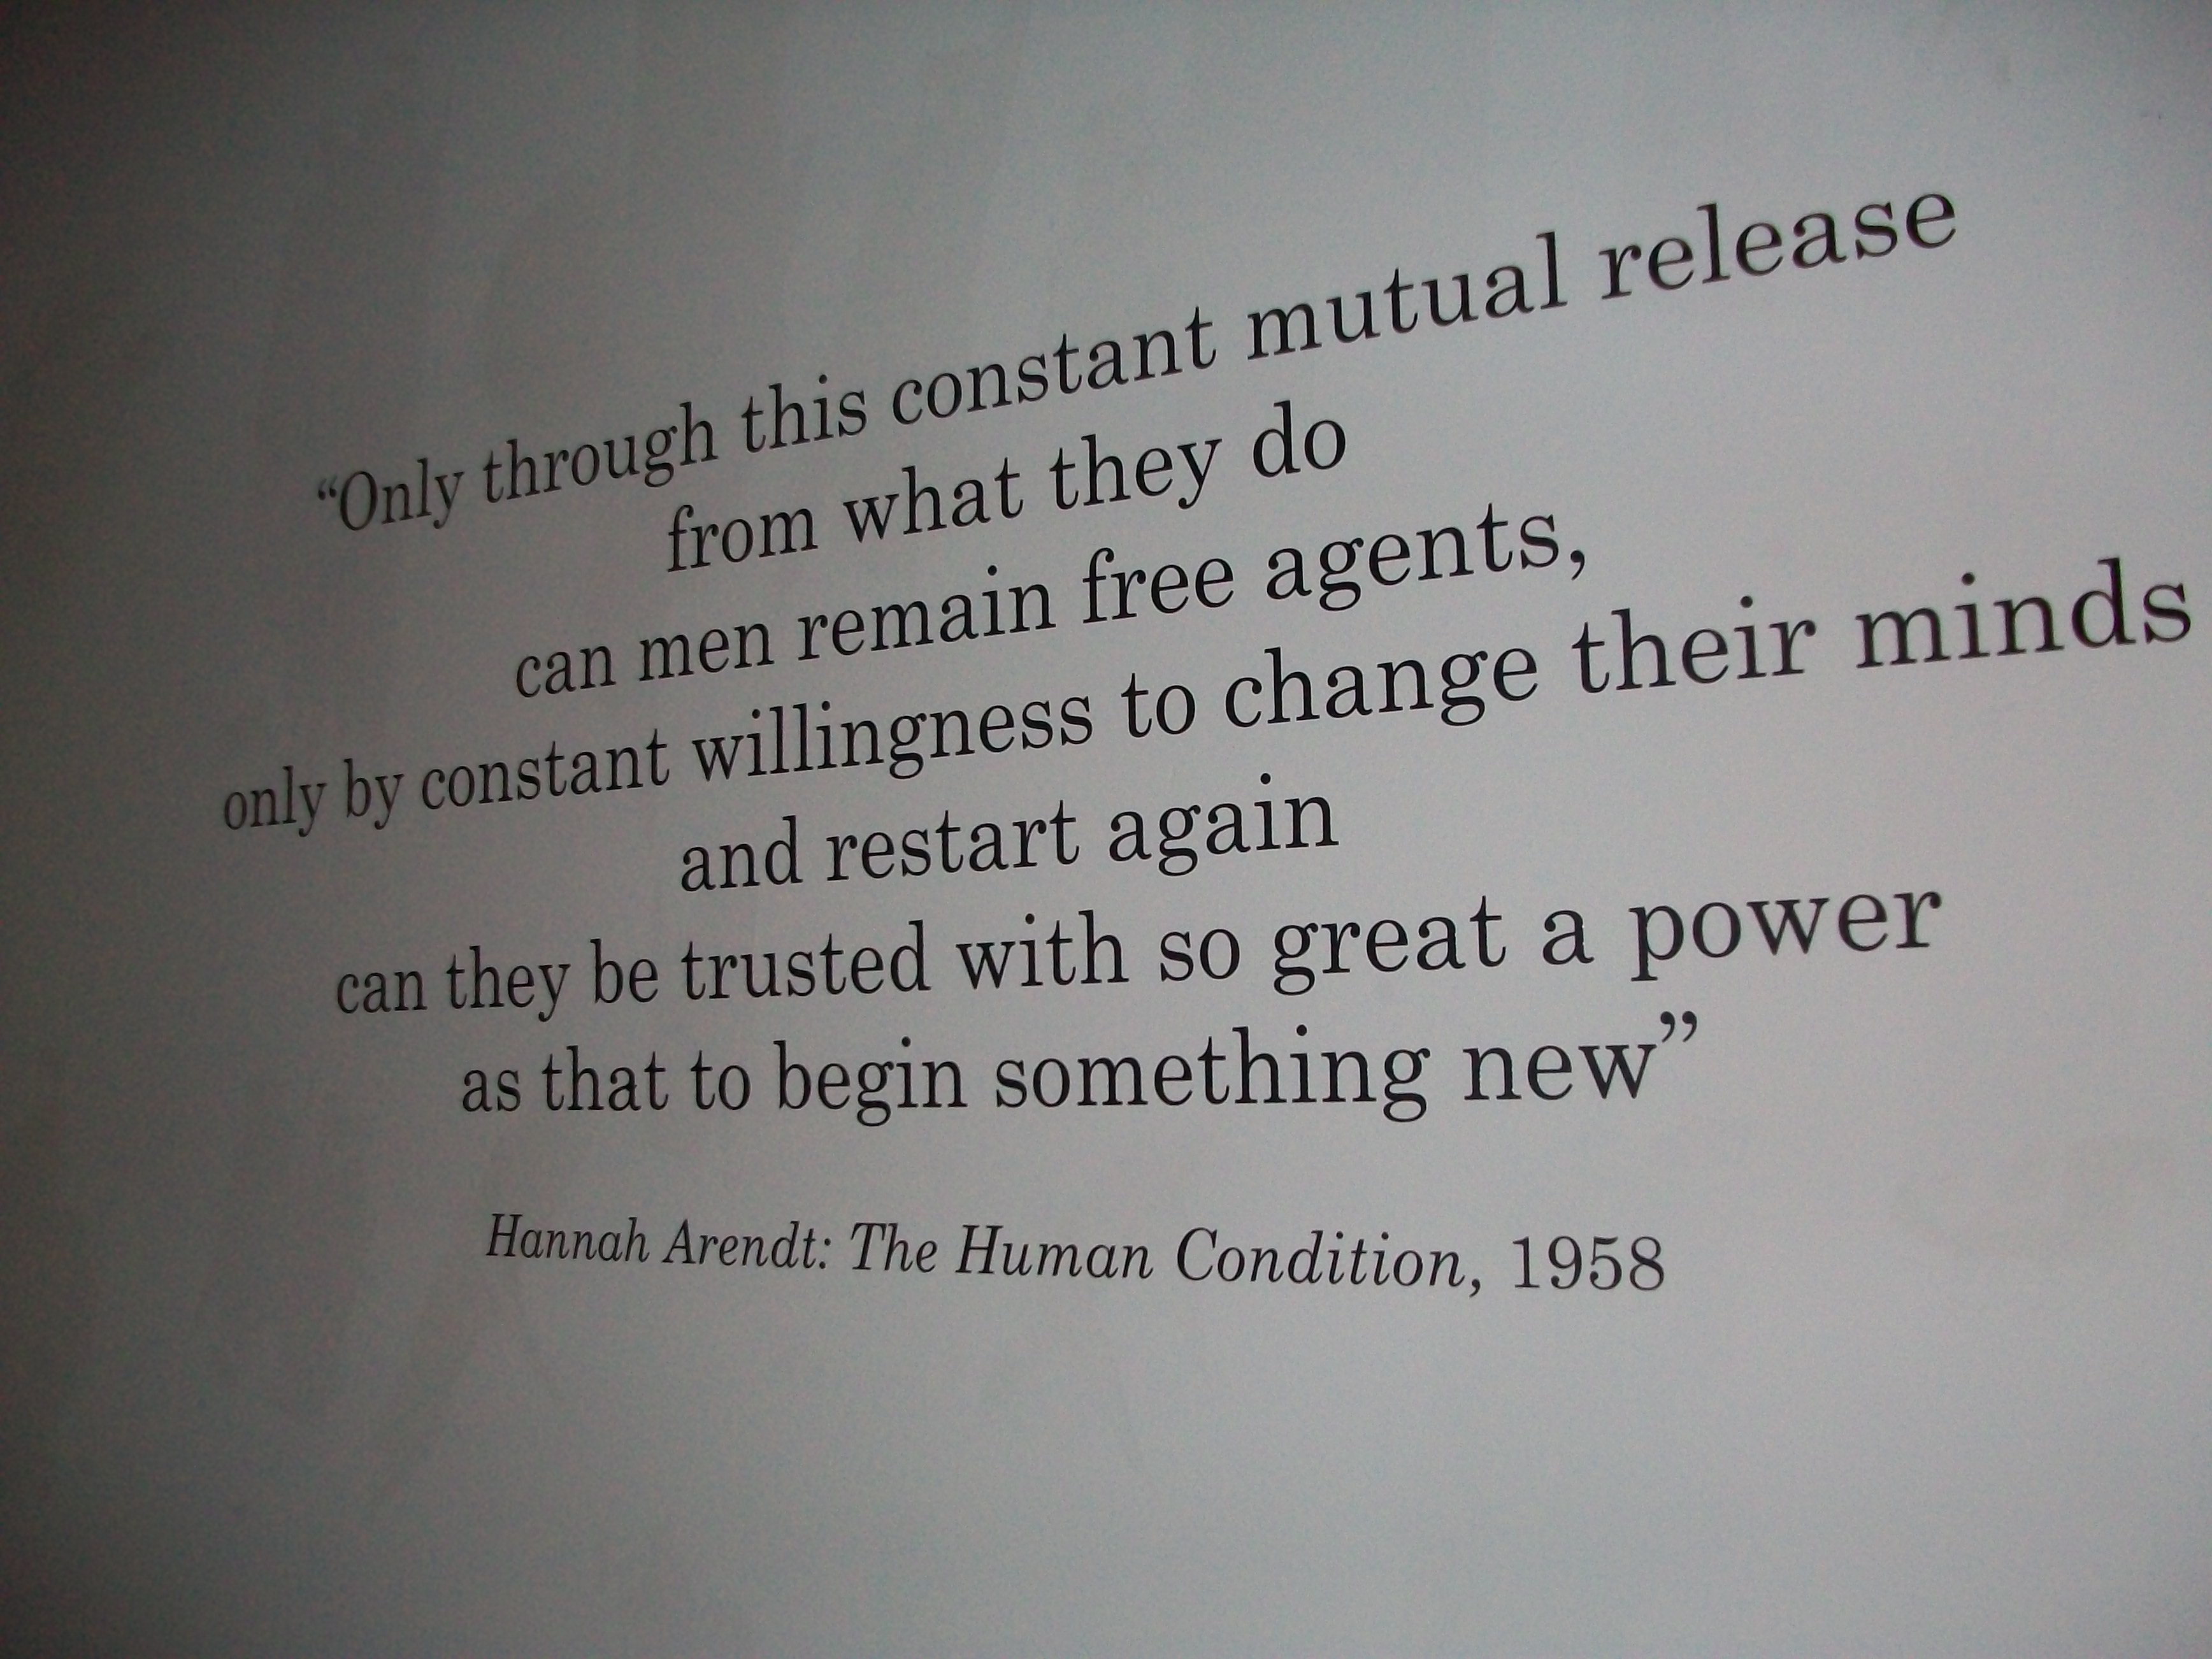 Hannah Arendt's quote #8